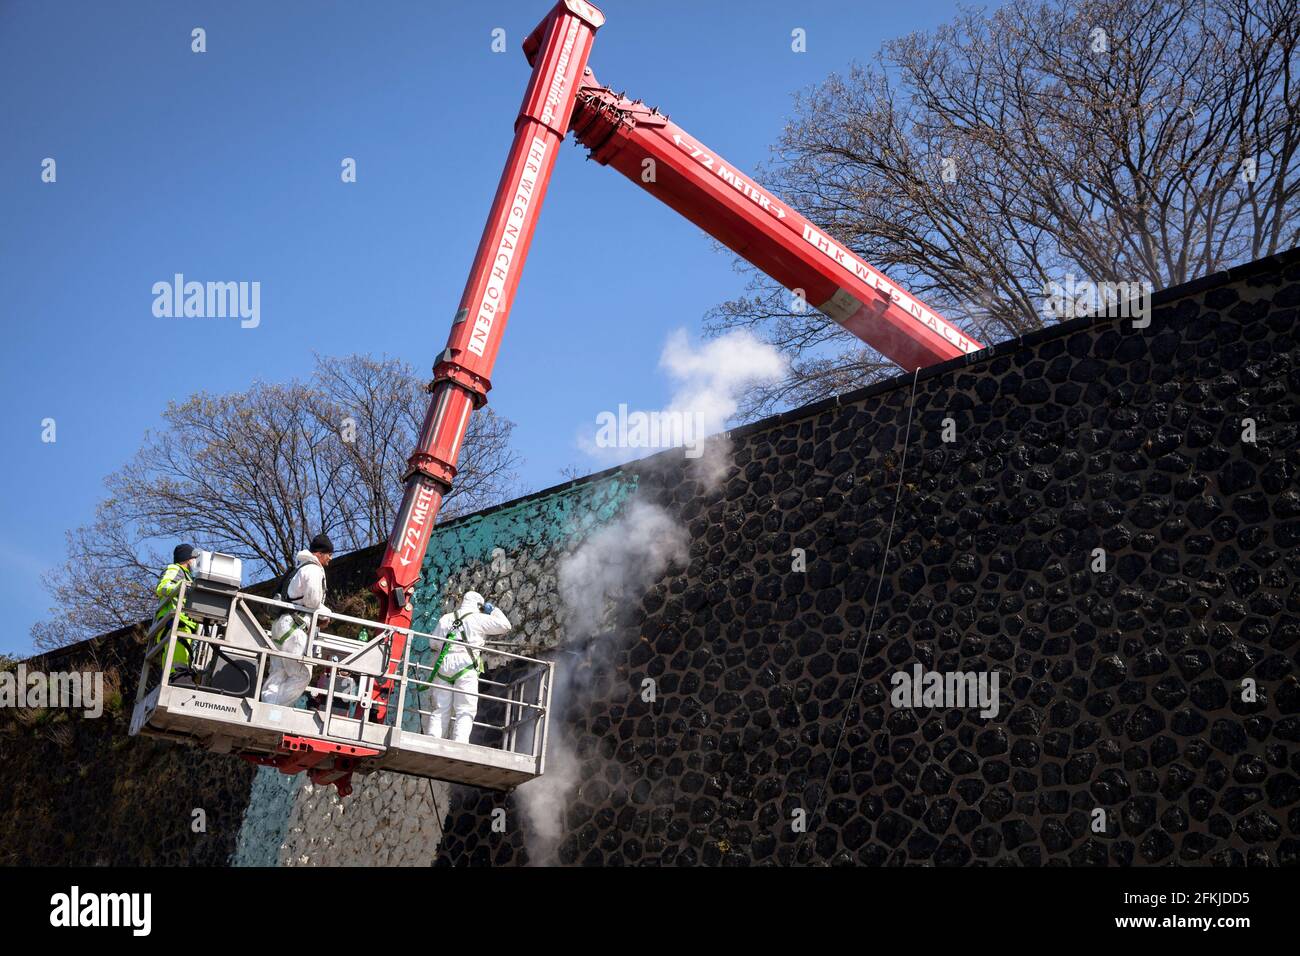 workers on a aerial work platform remove an illegal large graffiti on the bank wall on the river Rhine in Deutz district, Cologne, Germany.  Arbeiter Stock Photo